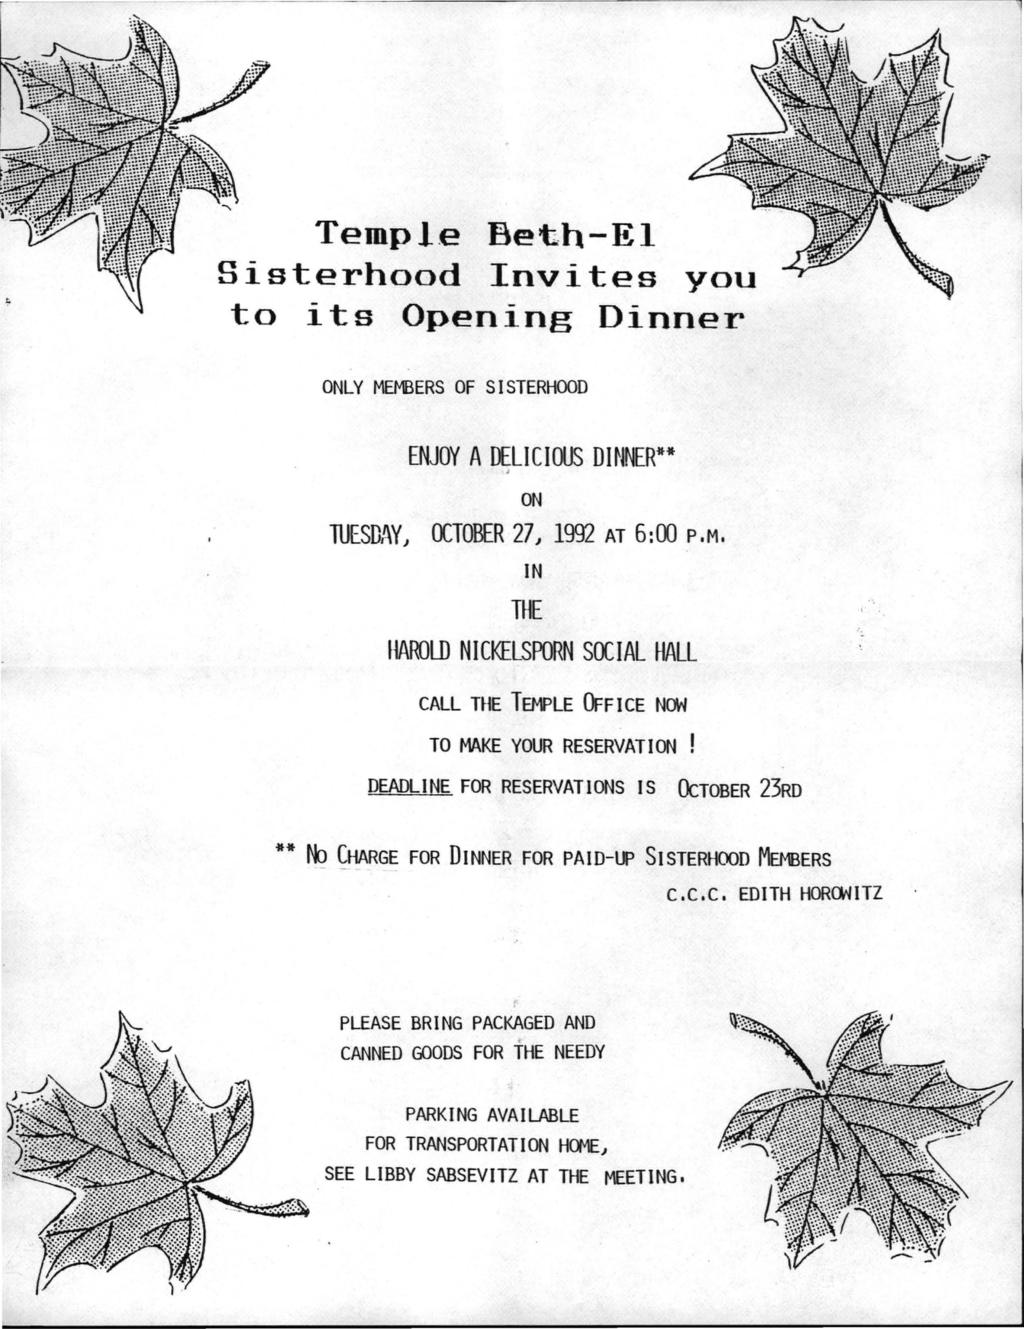 ------~ Templ.e Beth-El you its Opening Dinner ONLY MEMBERS OF SISTERHOOD ENJOY A DELICHIJS DINNER** I ON luesd,~y) OCTOBER 27) 1992 AT 6: 00 P. M. IN THE HAROLD NICKELSPORN SOCIAL HALL CALL THE TEMPLE ():F I CE NOW TO MAKE YOUR RESERVATION!